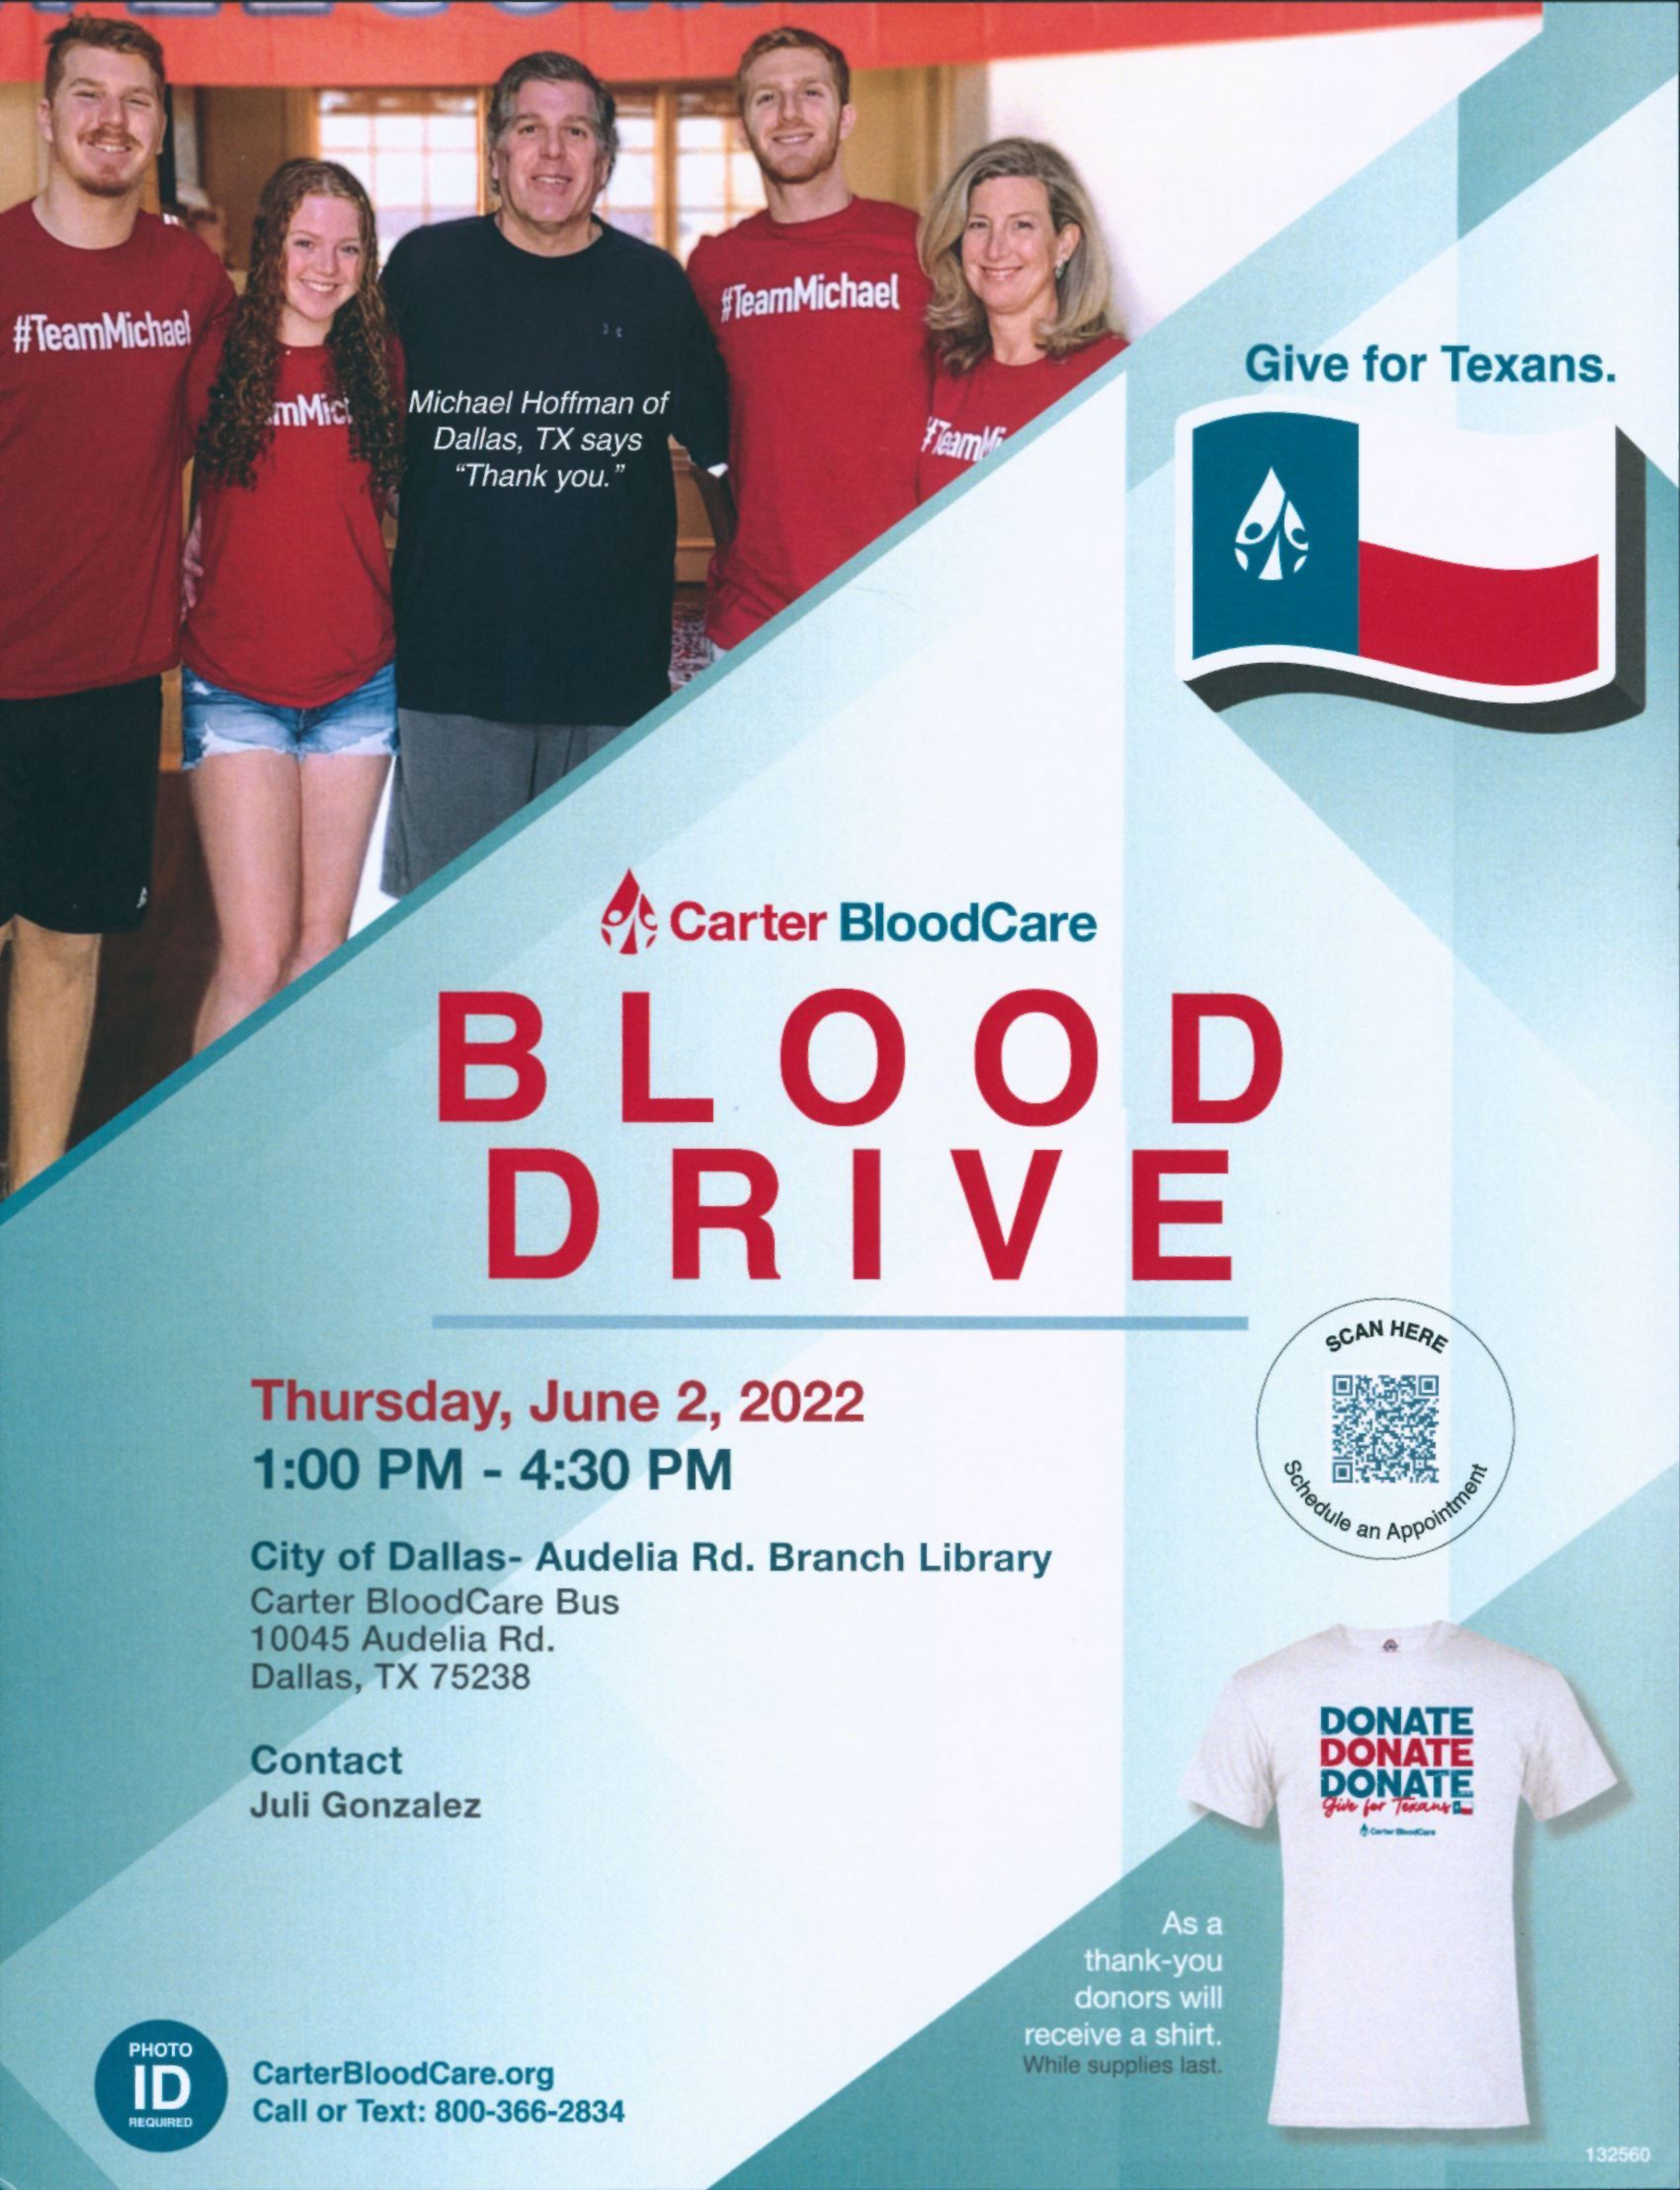 Blood Drive Flyer showing happy family, Texas flag, QR code